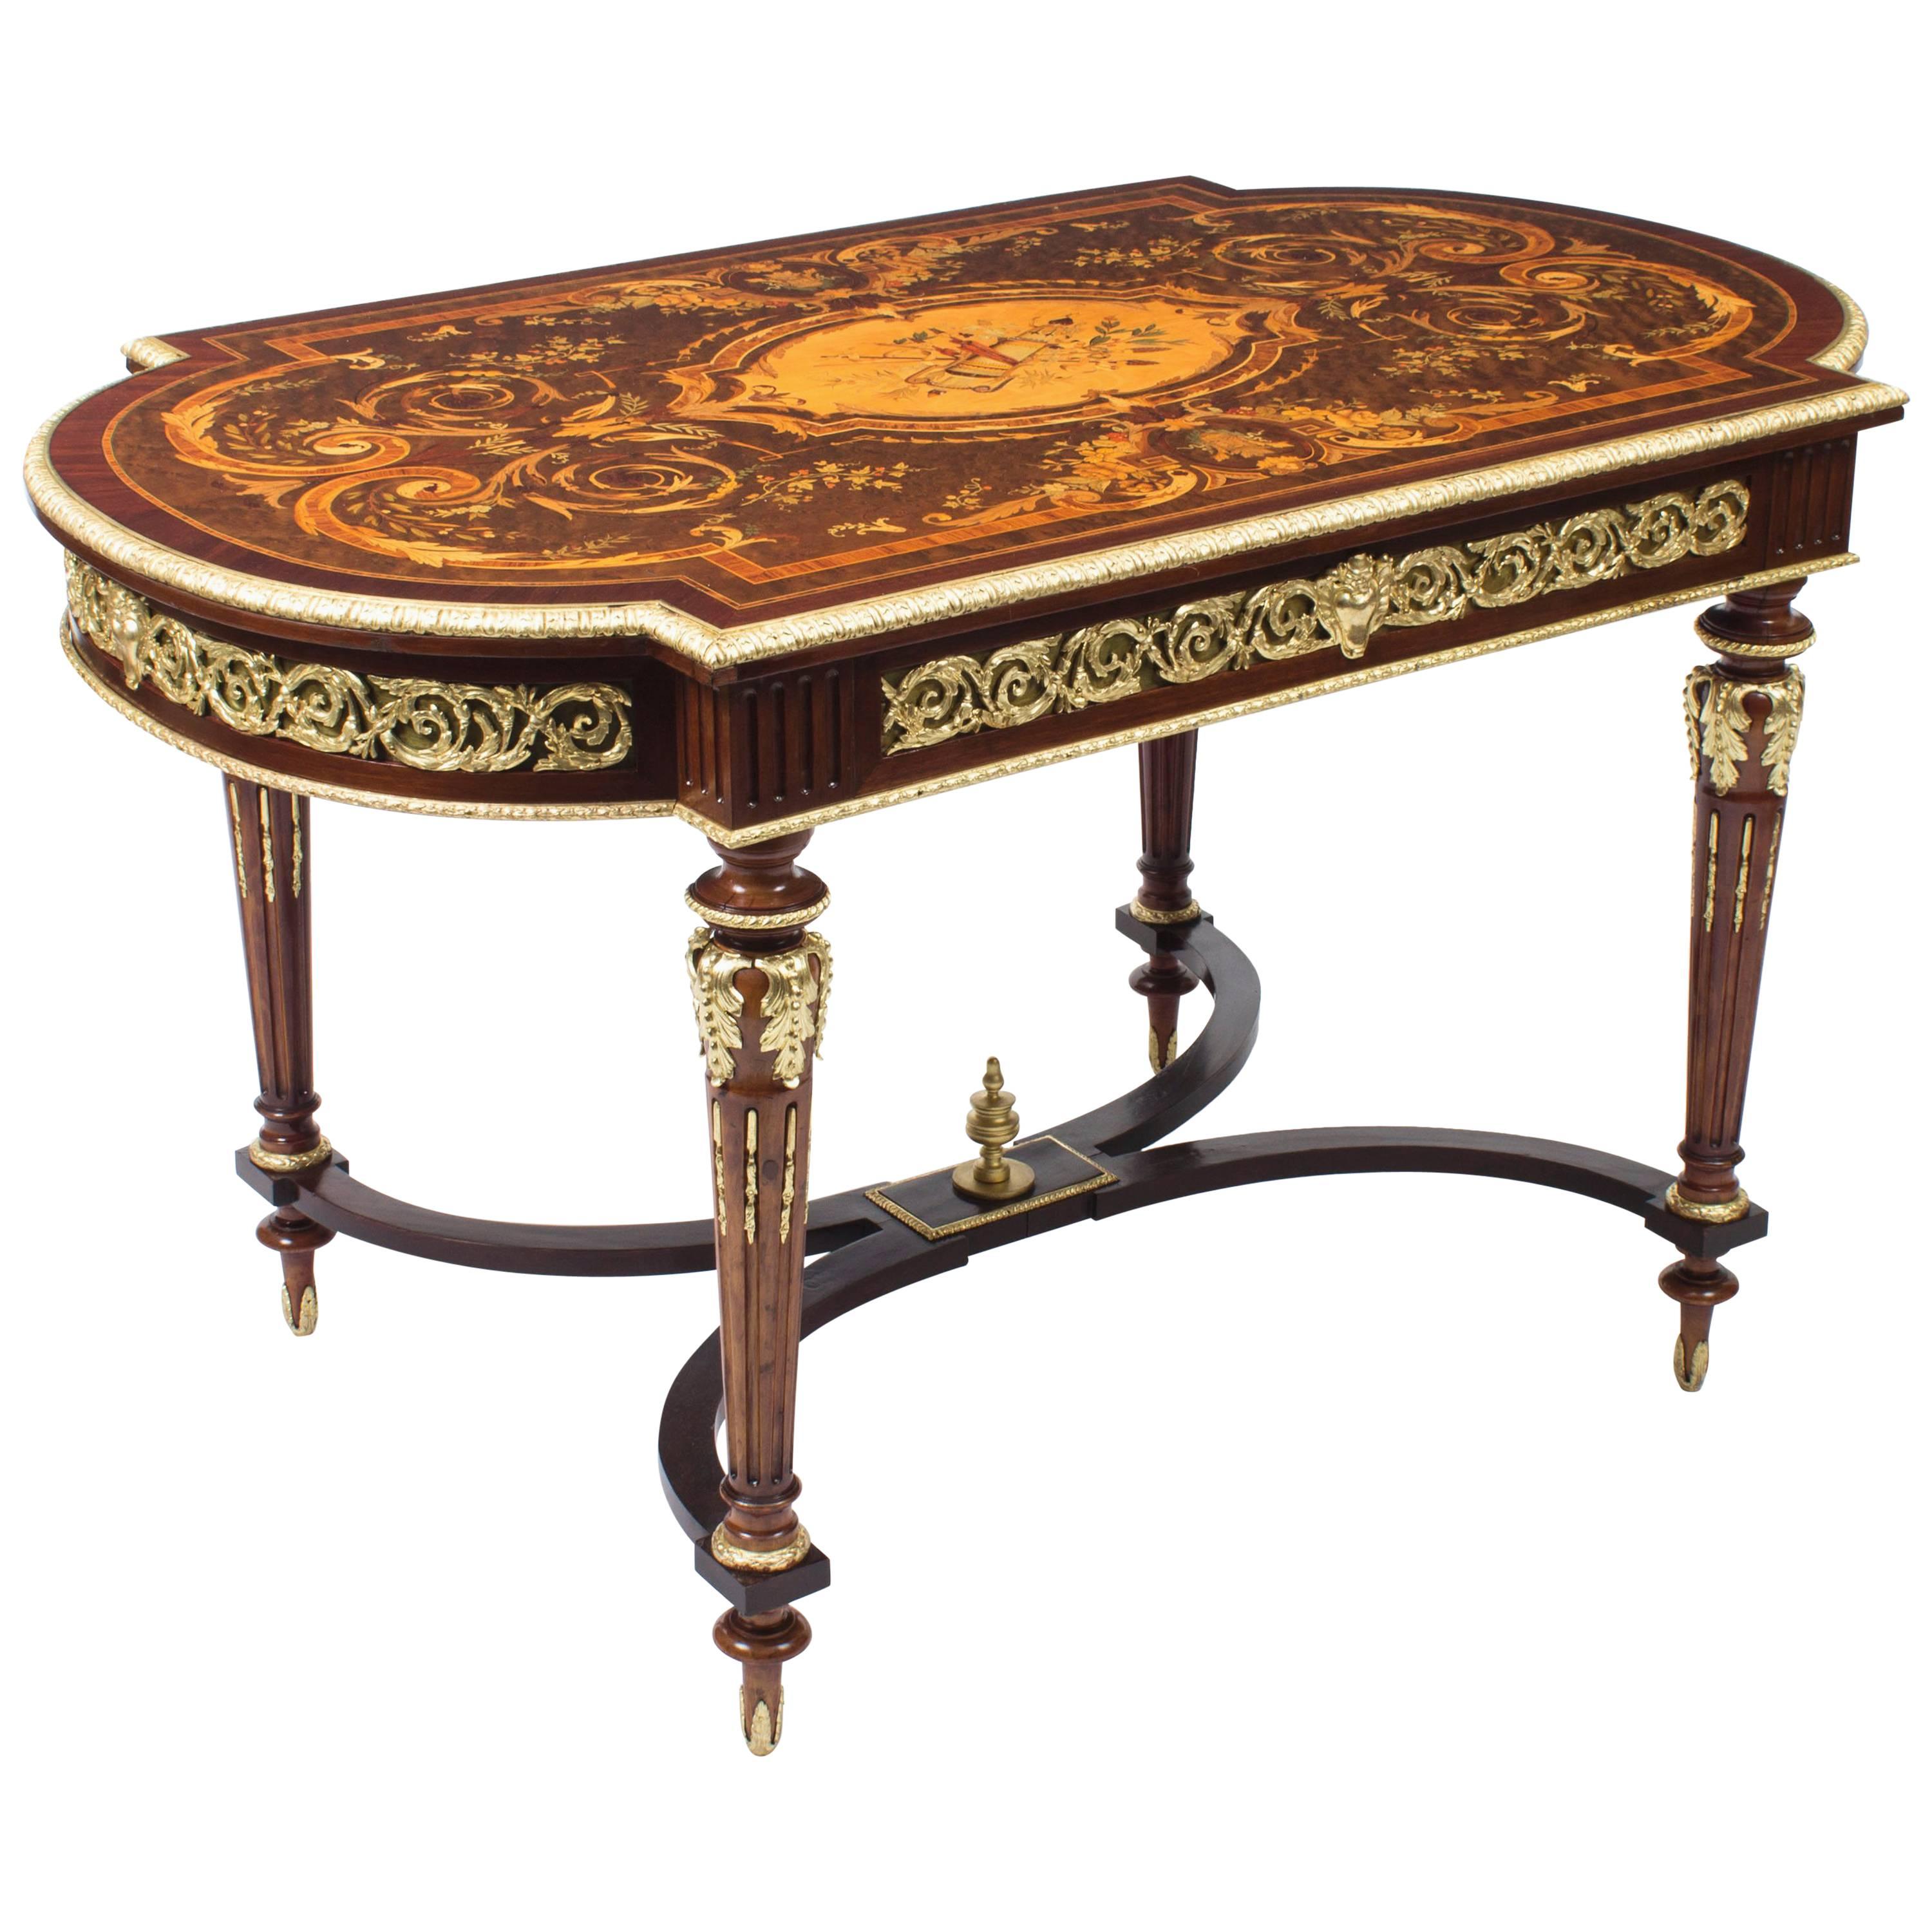 19th Century French Ormolu-Mounted Marquetry Bureau Plat For Sale